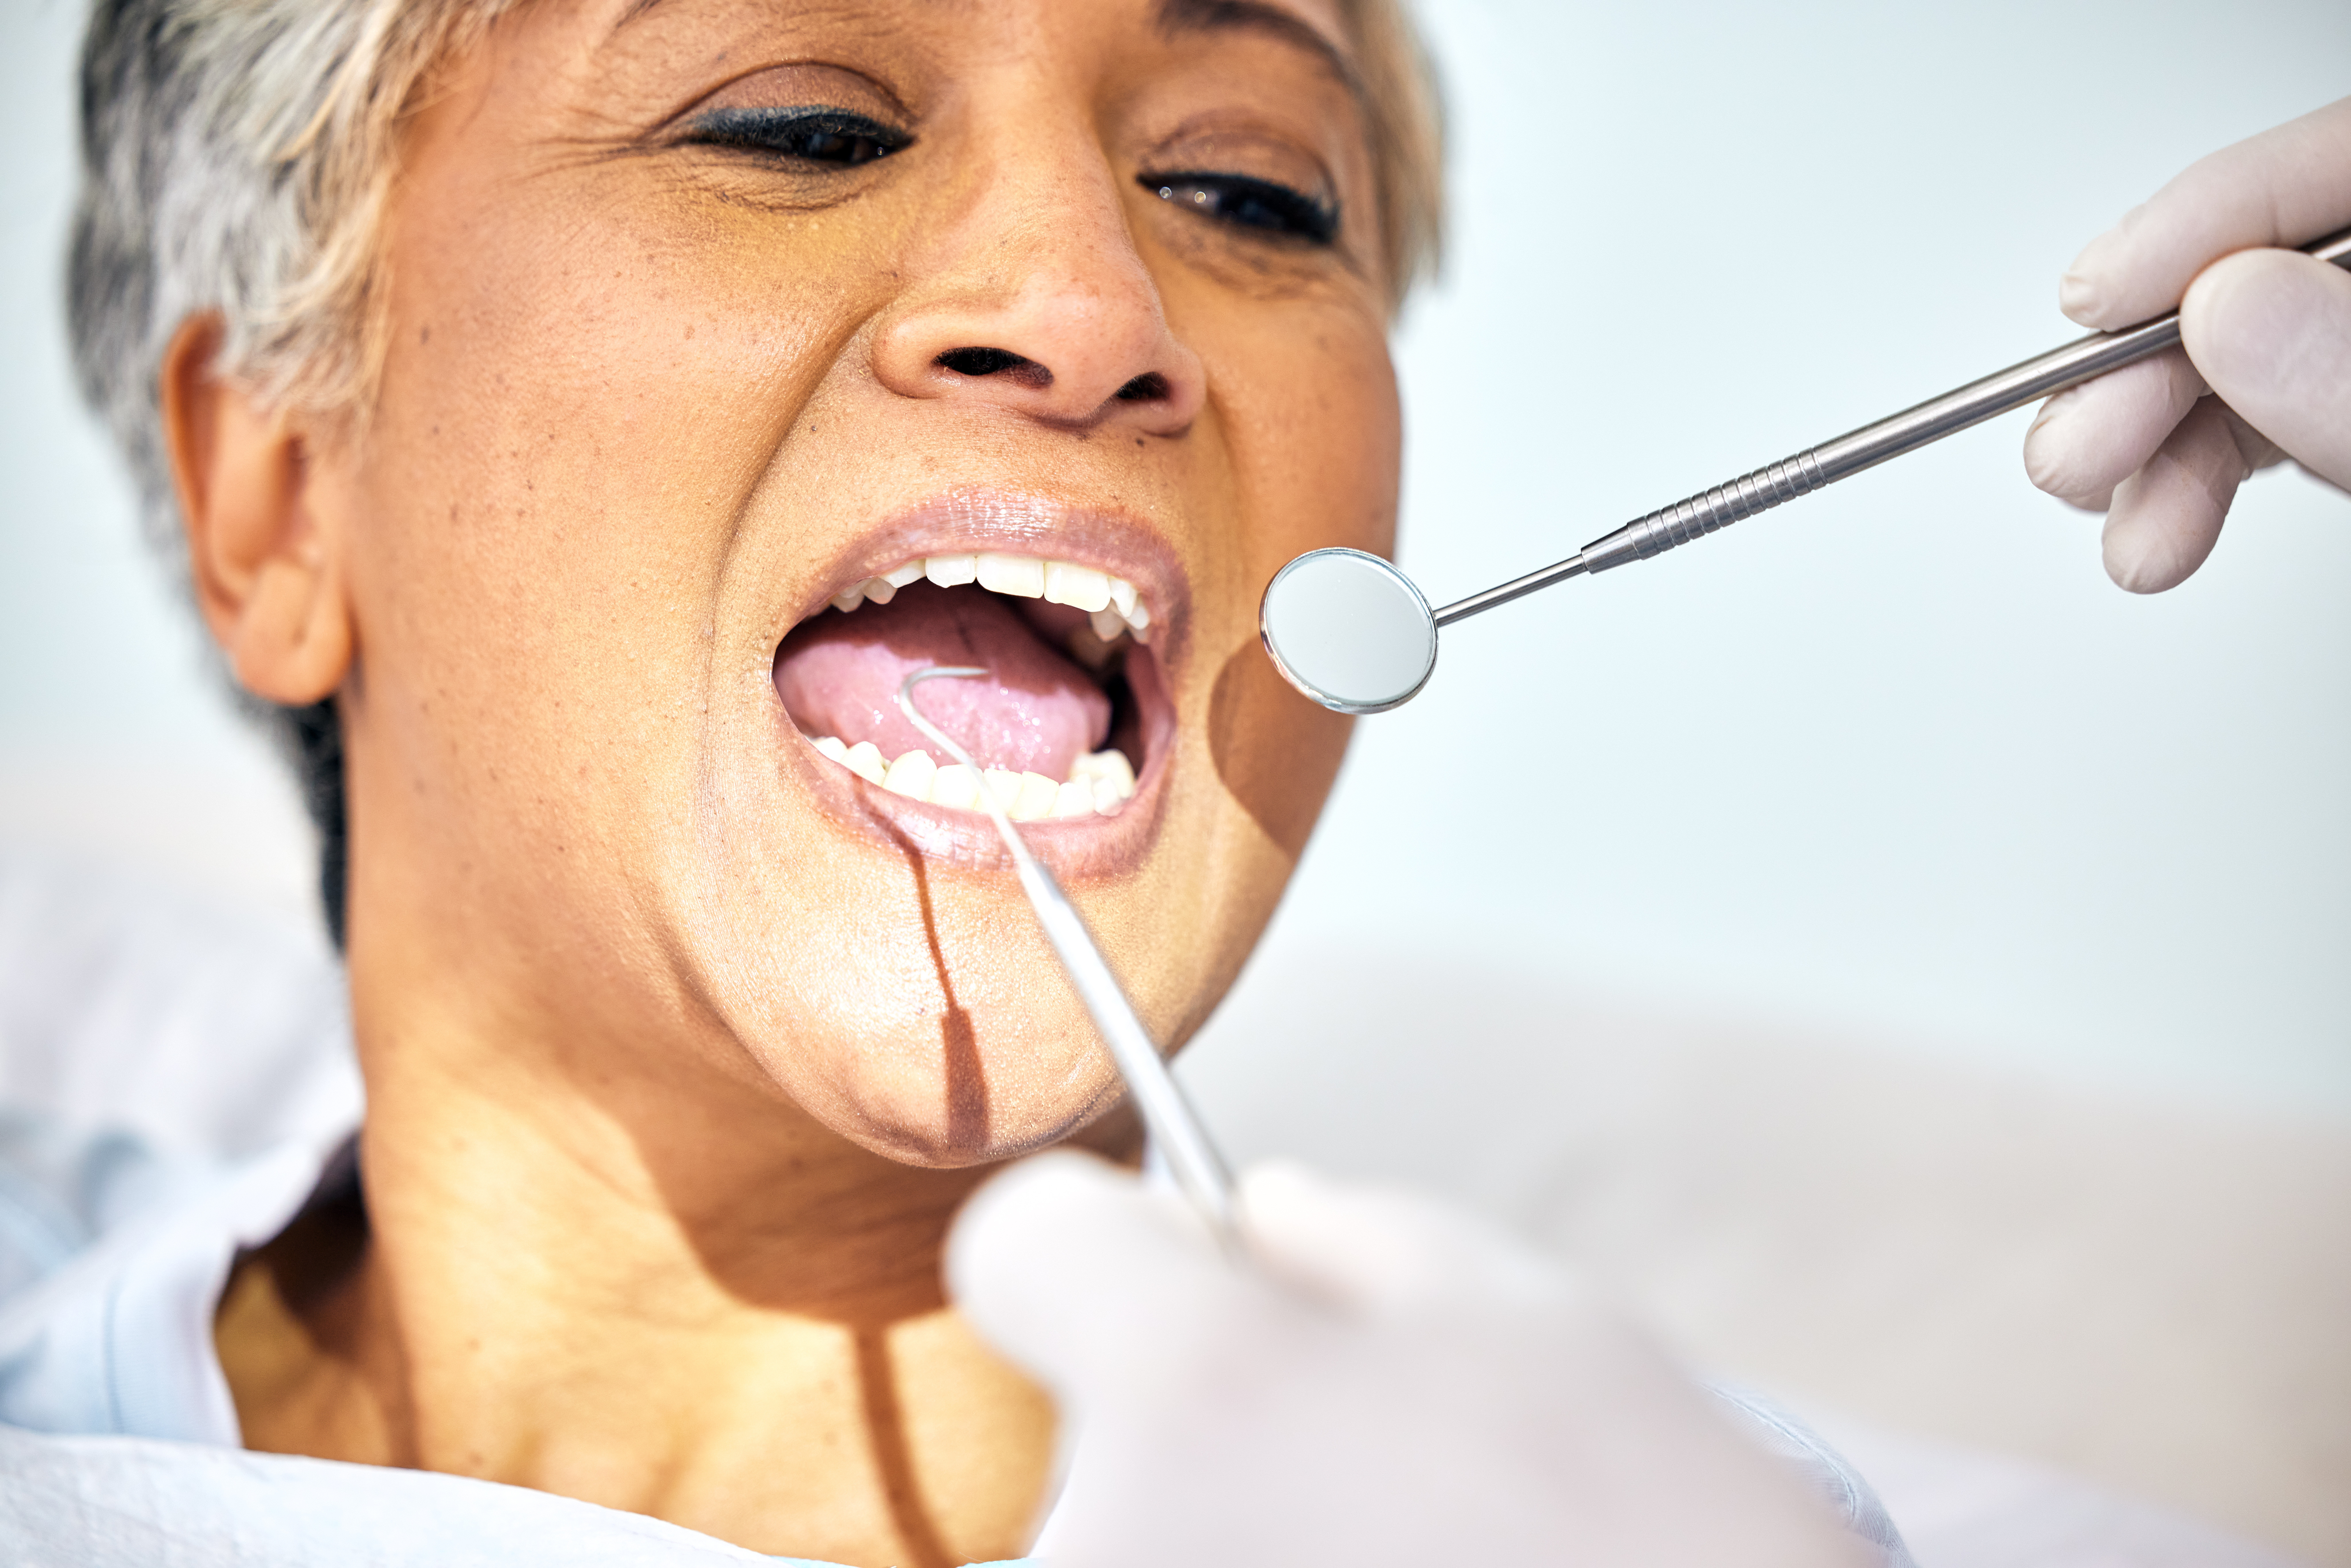 San Dieg, CA dentist offers oral conscious sedation for patients or patients 